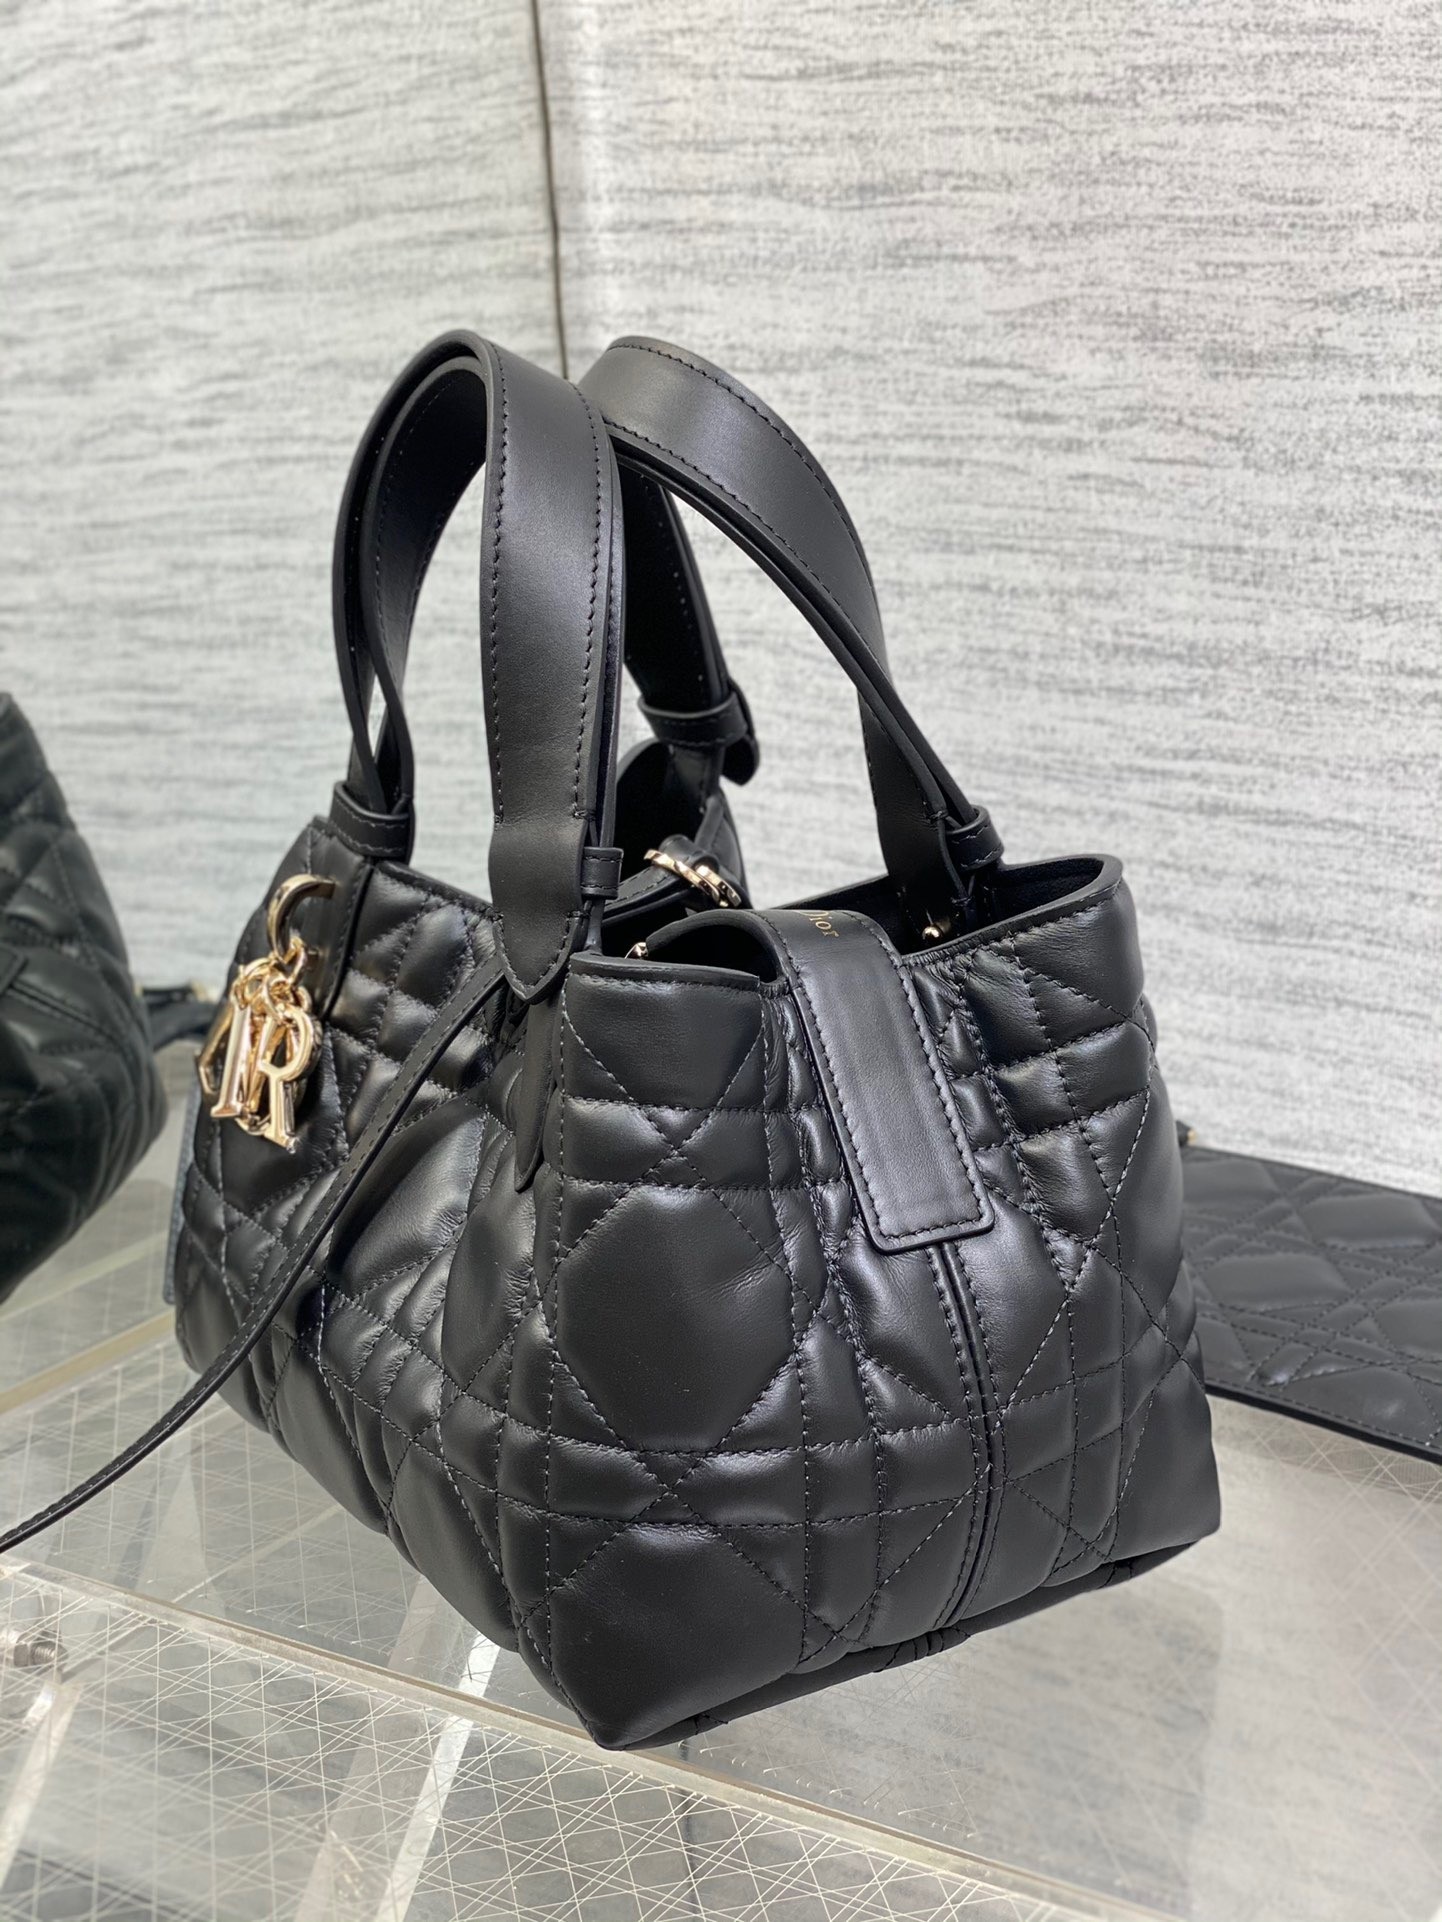 Dior Toujours Small Bag in Black Macrocannage Calfskin 756